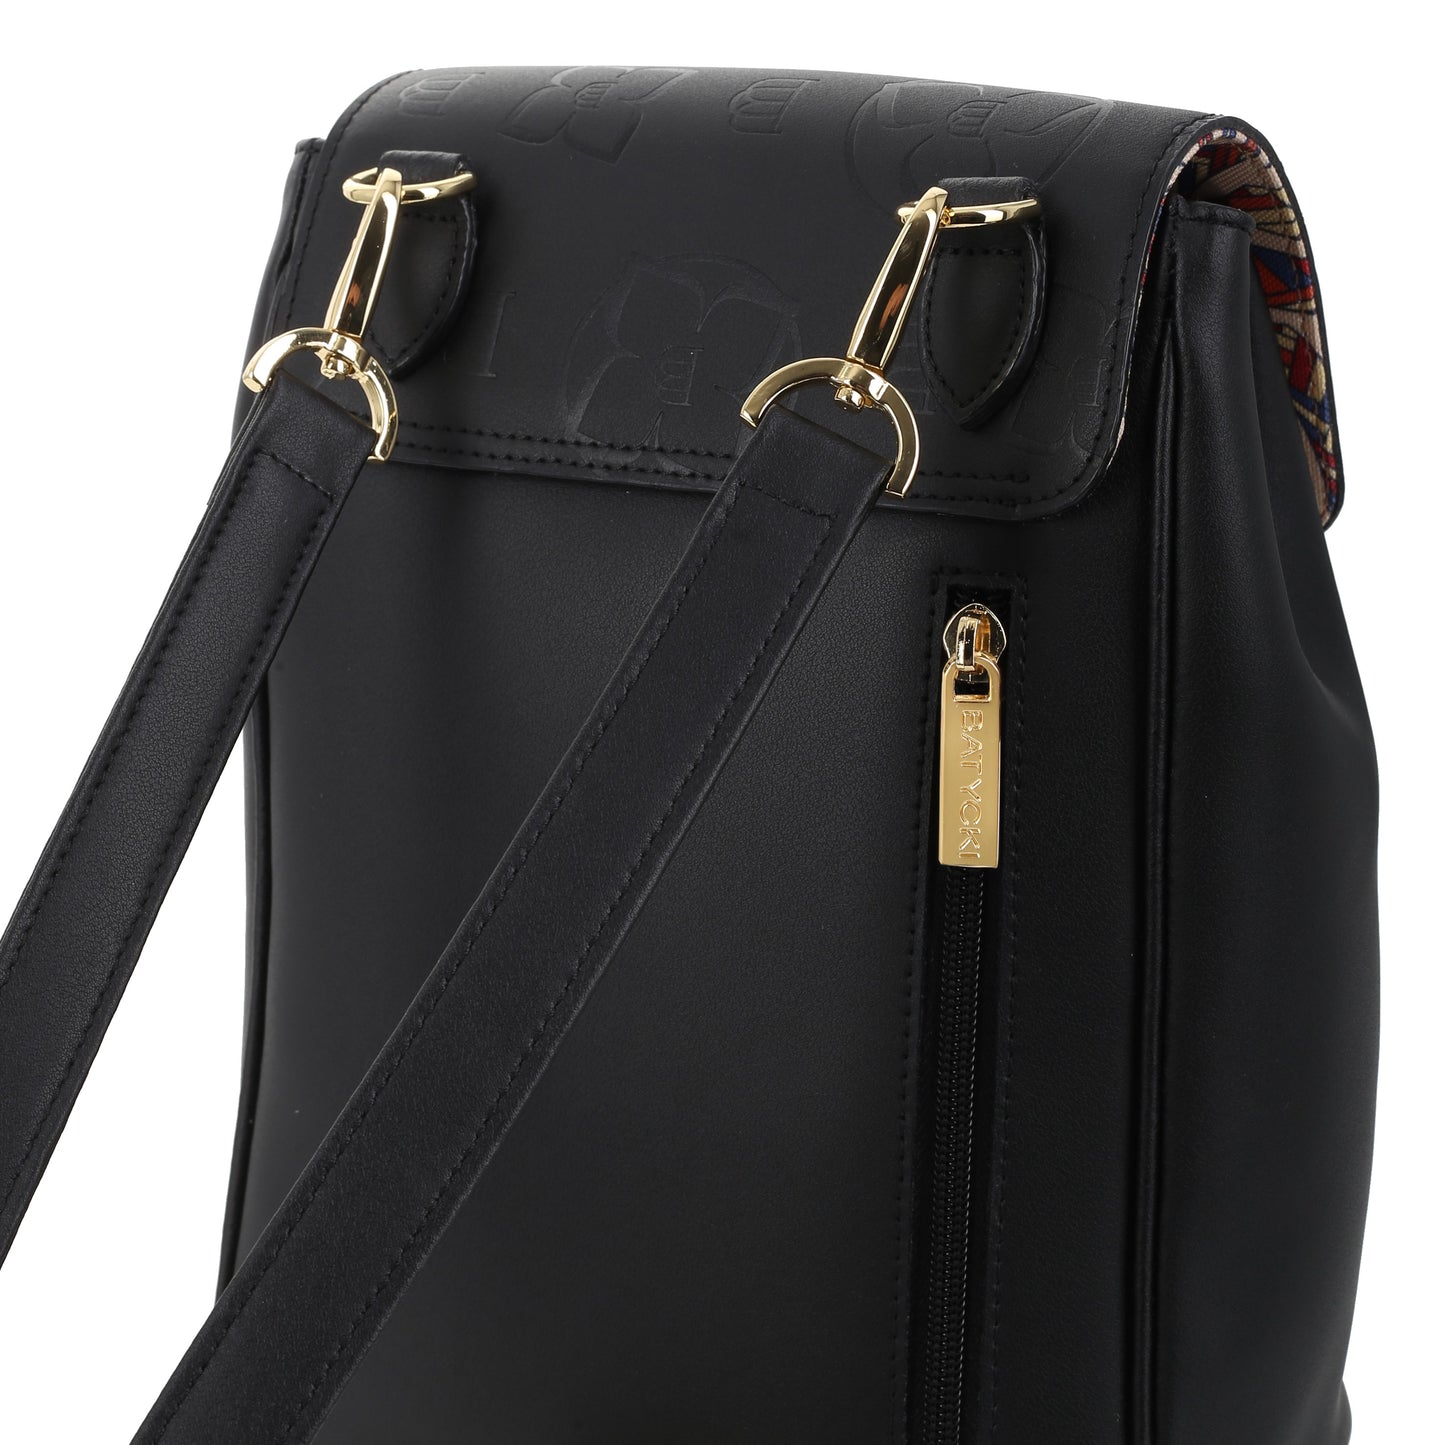 VICTORIA NAPA BLACK women's leather backpack